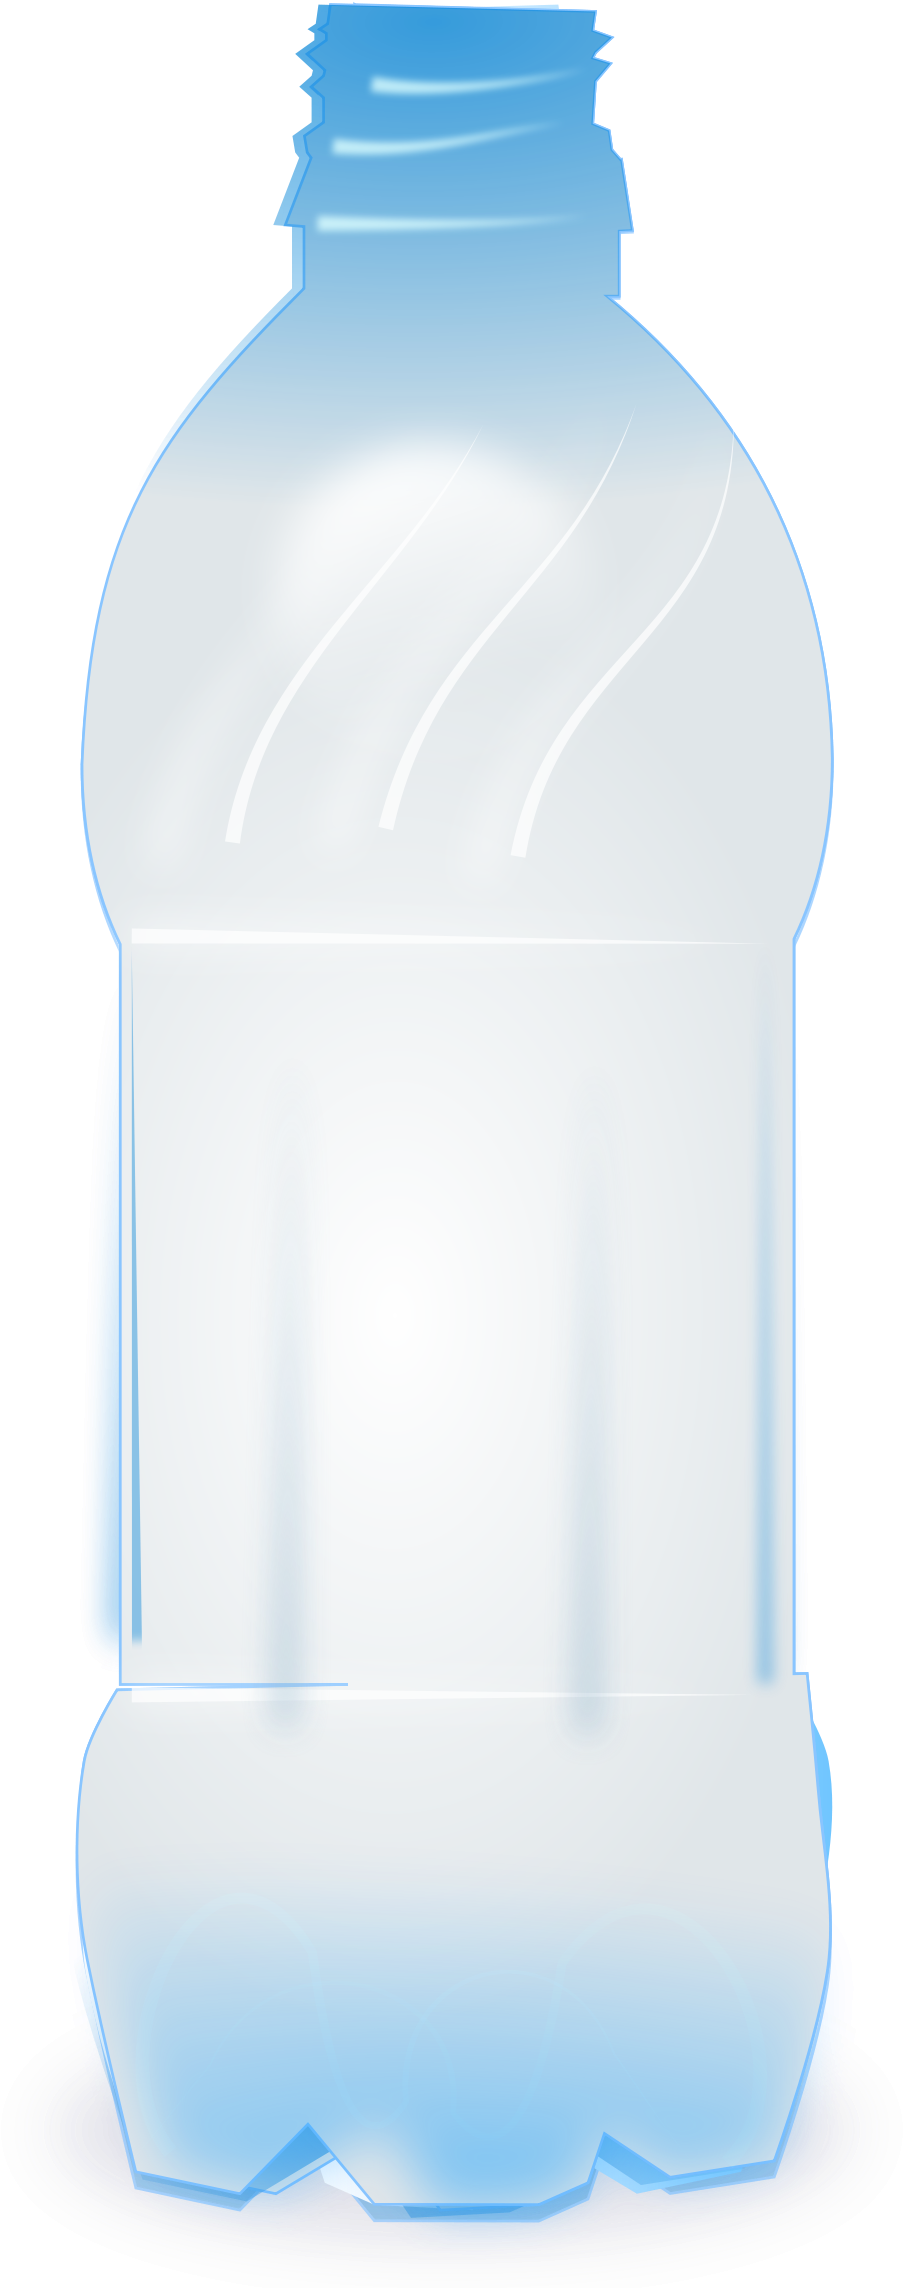 A White Plastic Bottle With A Black Background